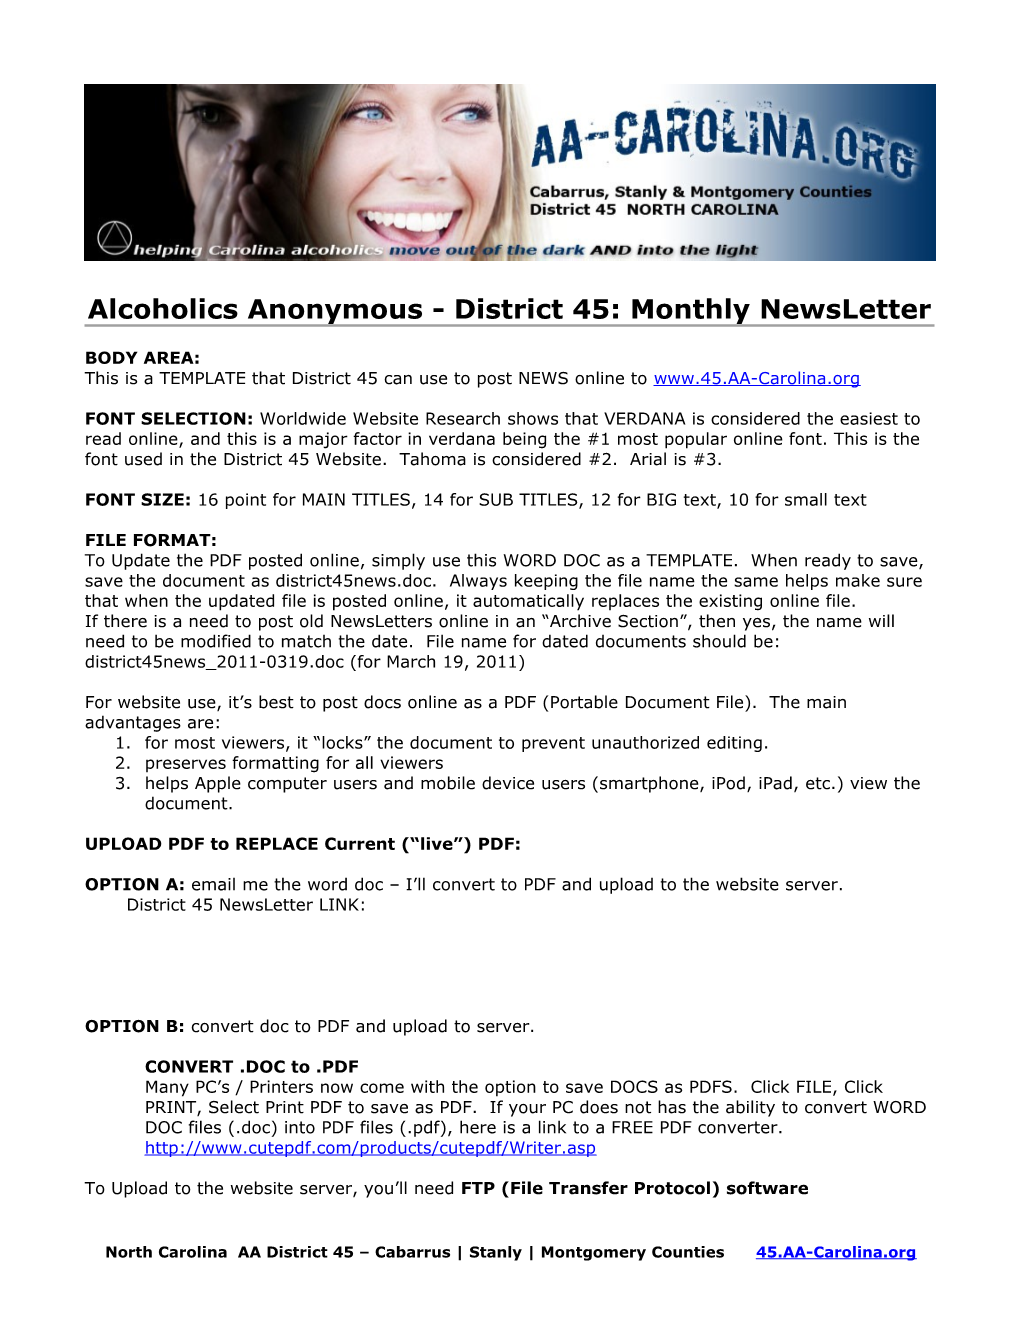 Alcoholics Anonymous - District 45: Monthly Newsletter